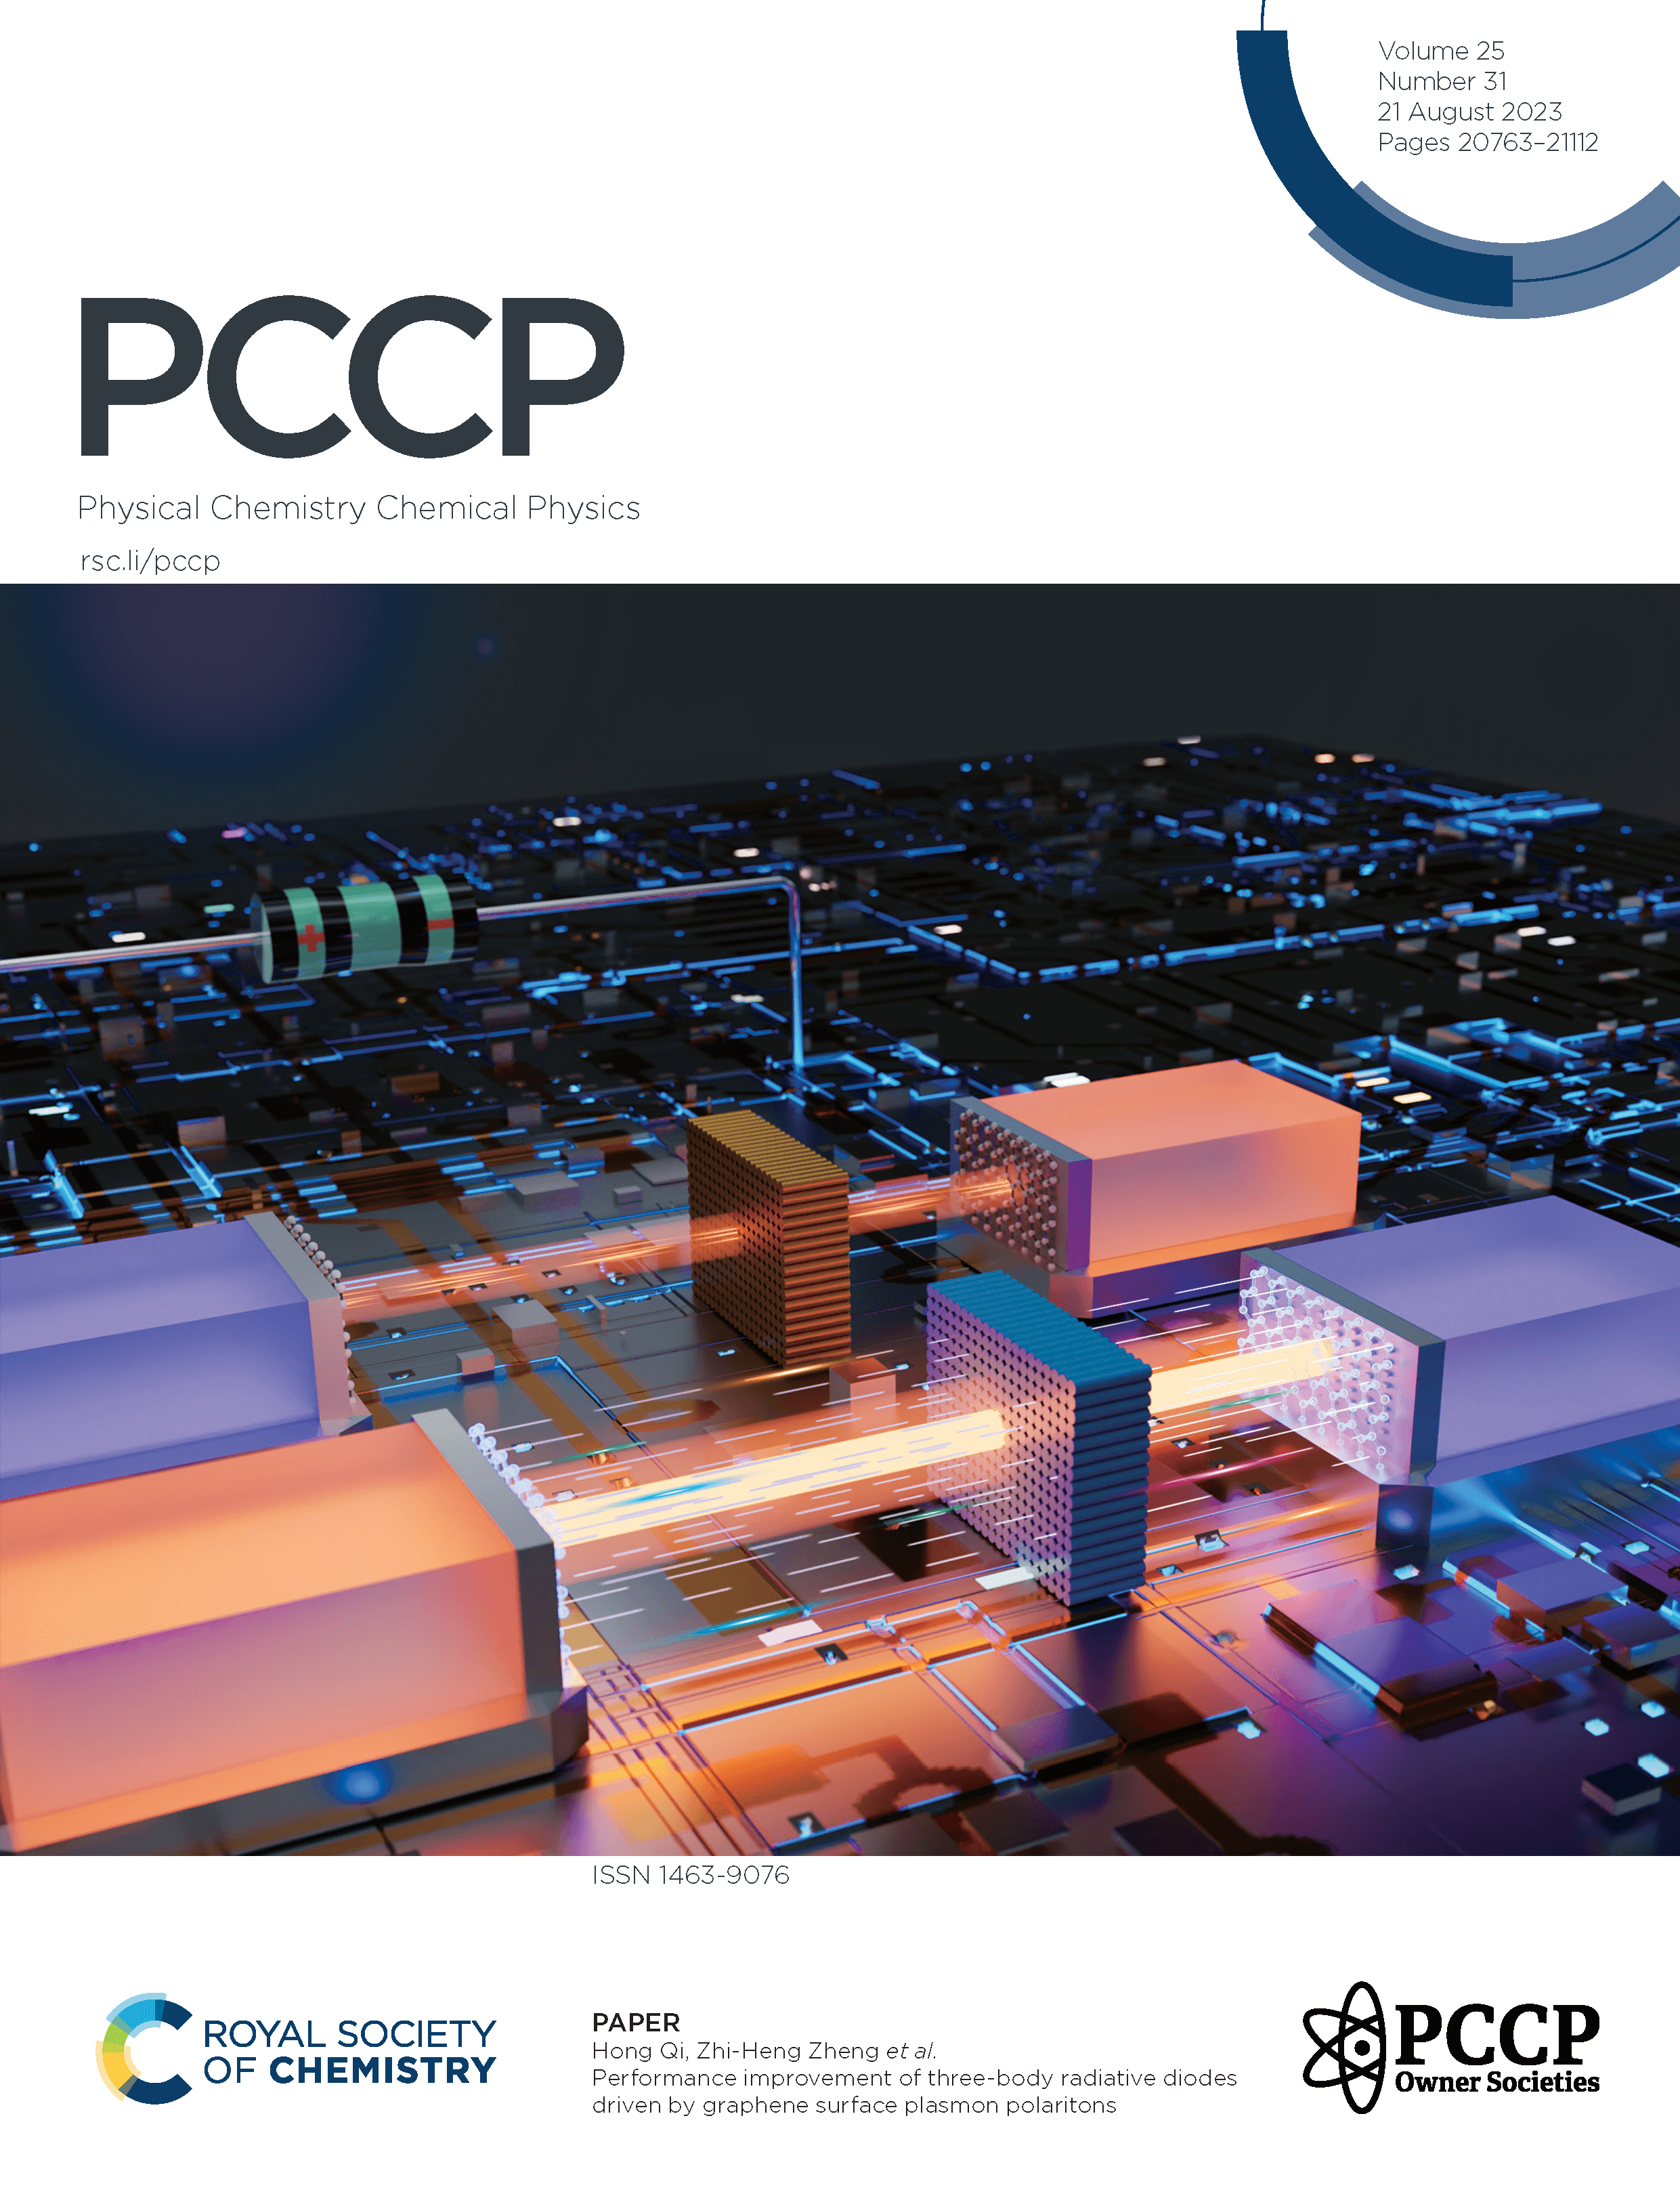 LetPub Journal Cover Art Design - Performance improvement of three-body radiative diodes driven by graphene surface plasmon polaritons